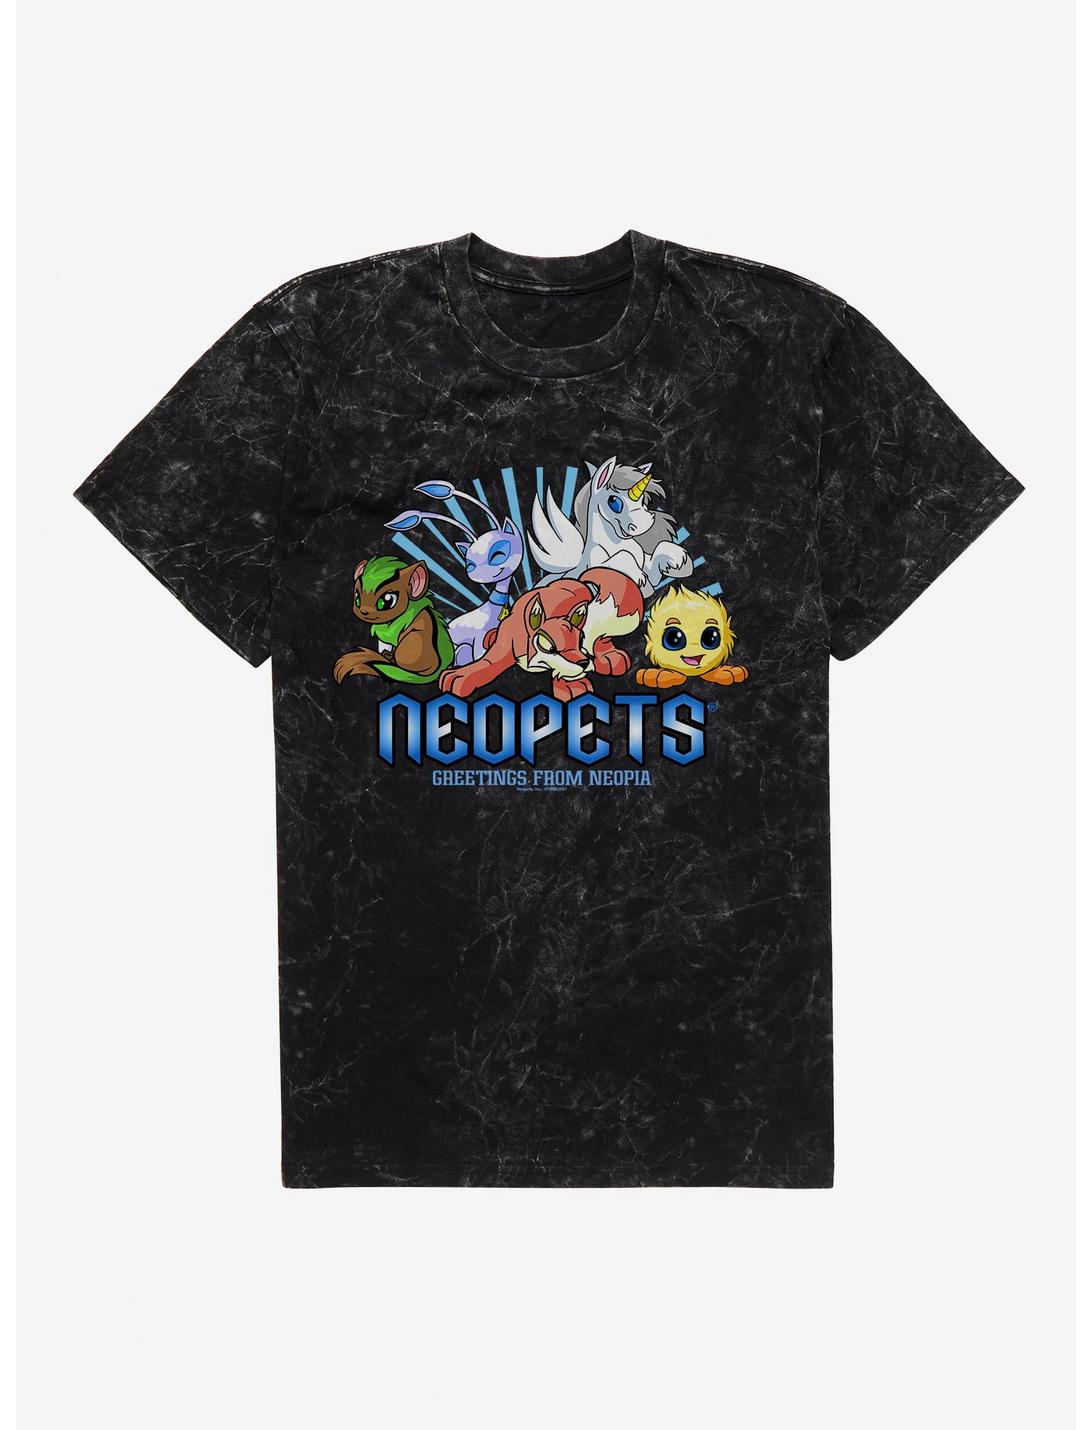 Neopets Greetings From Neopia Mineral Wash T-Shirt, BLACK MINERAL WASH, hi-res